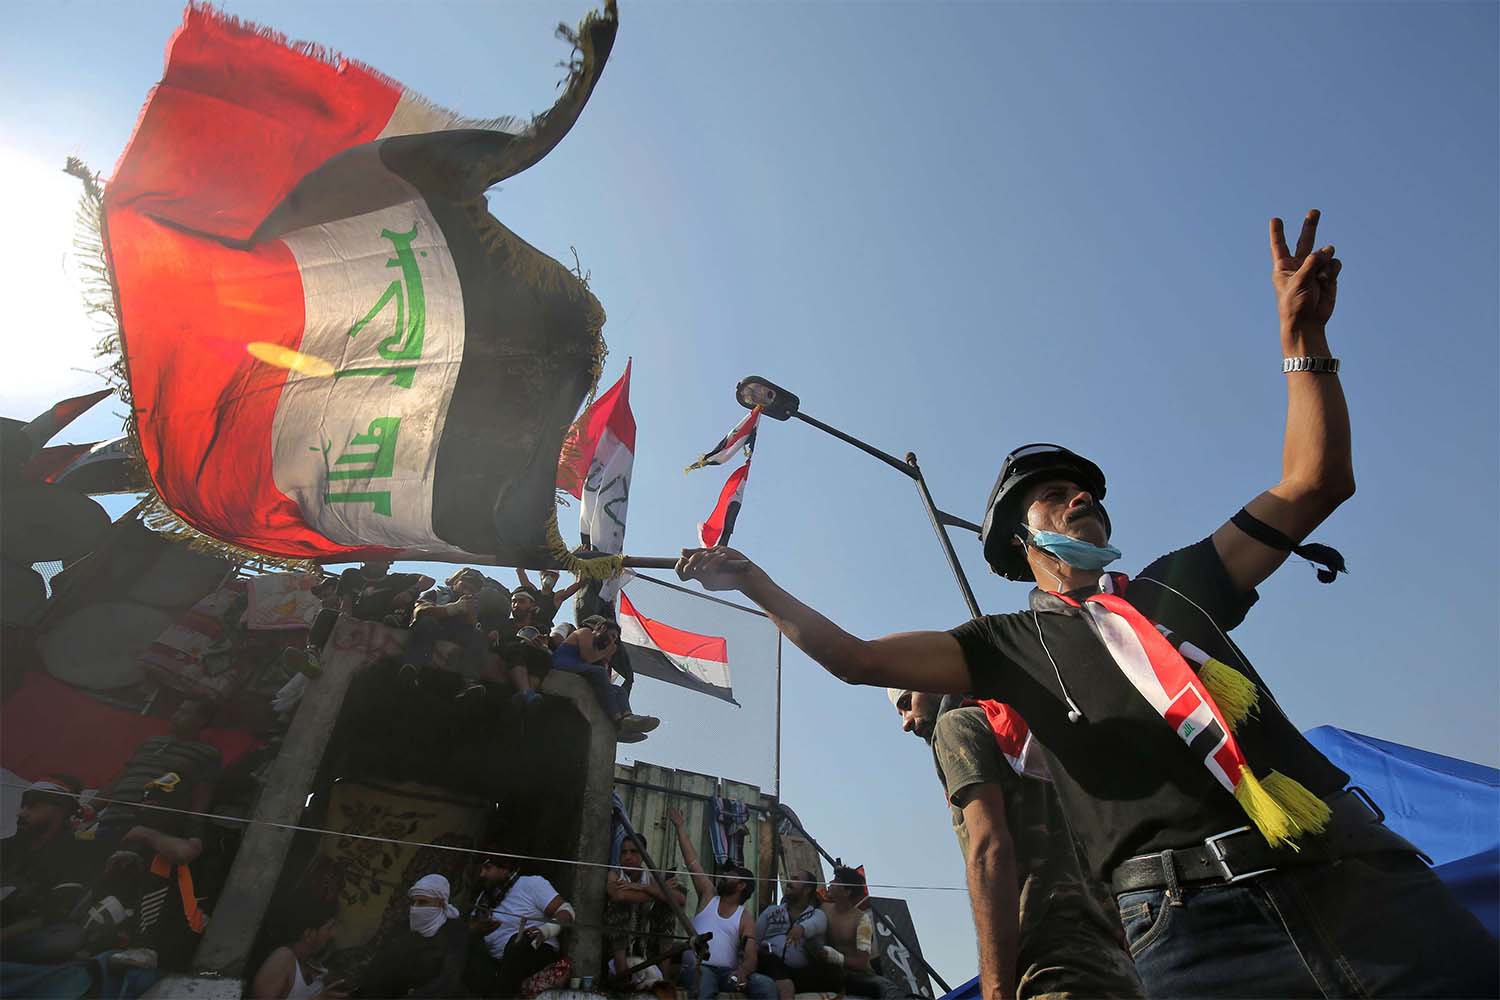 More than 250 Iraqis have been killed in demonstrations since the start of October 